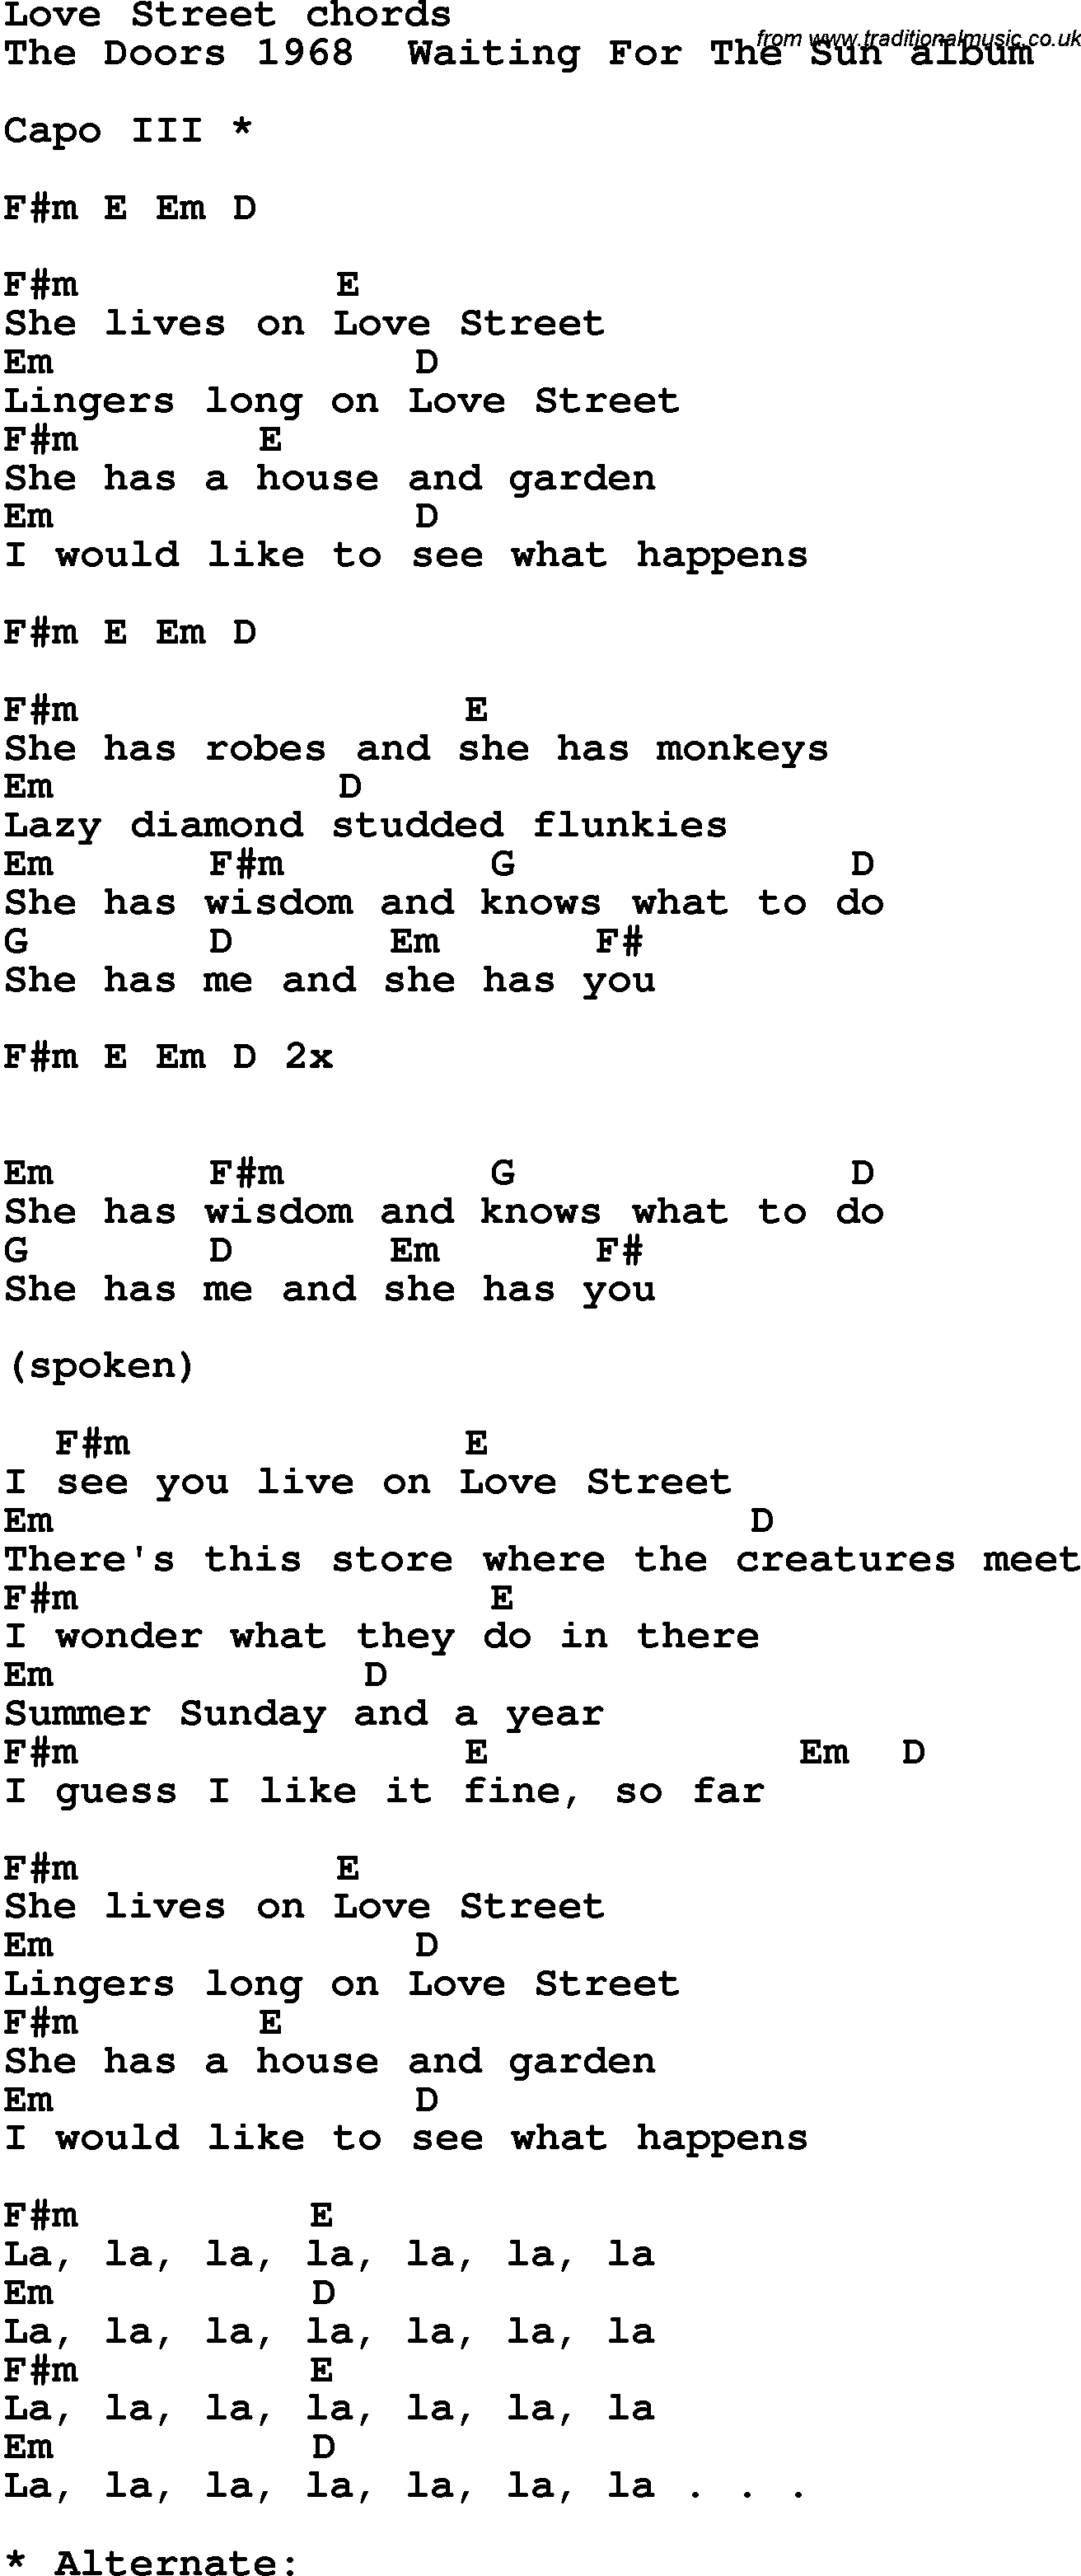 Song Lyrics with guitar chords for Love Street